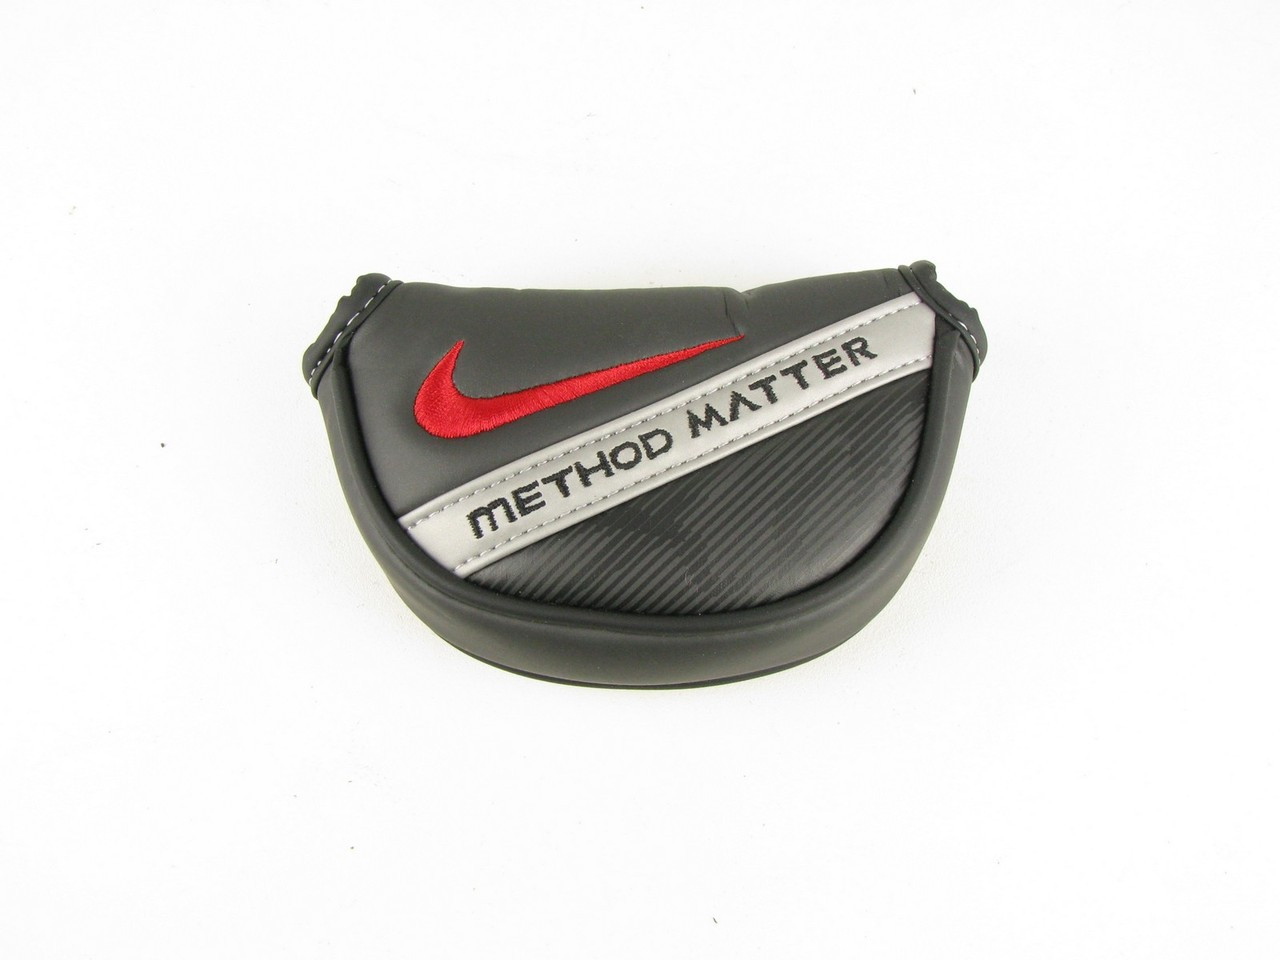 Nike Method Matter MALLET Putter Headcover - Clubs n Covers